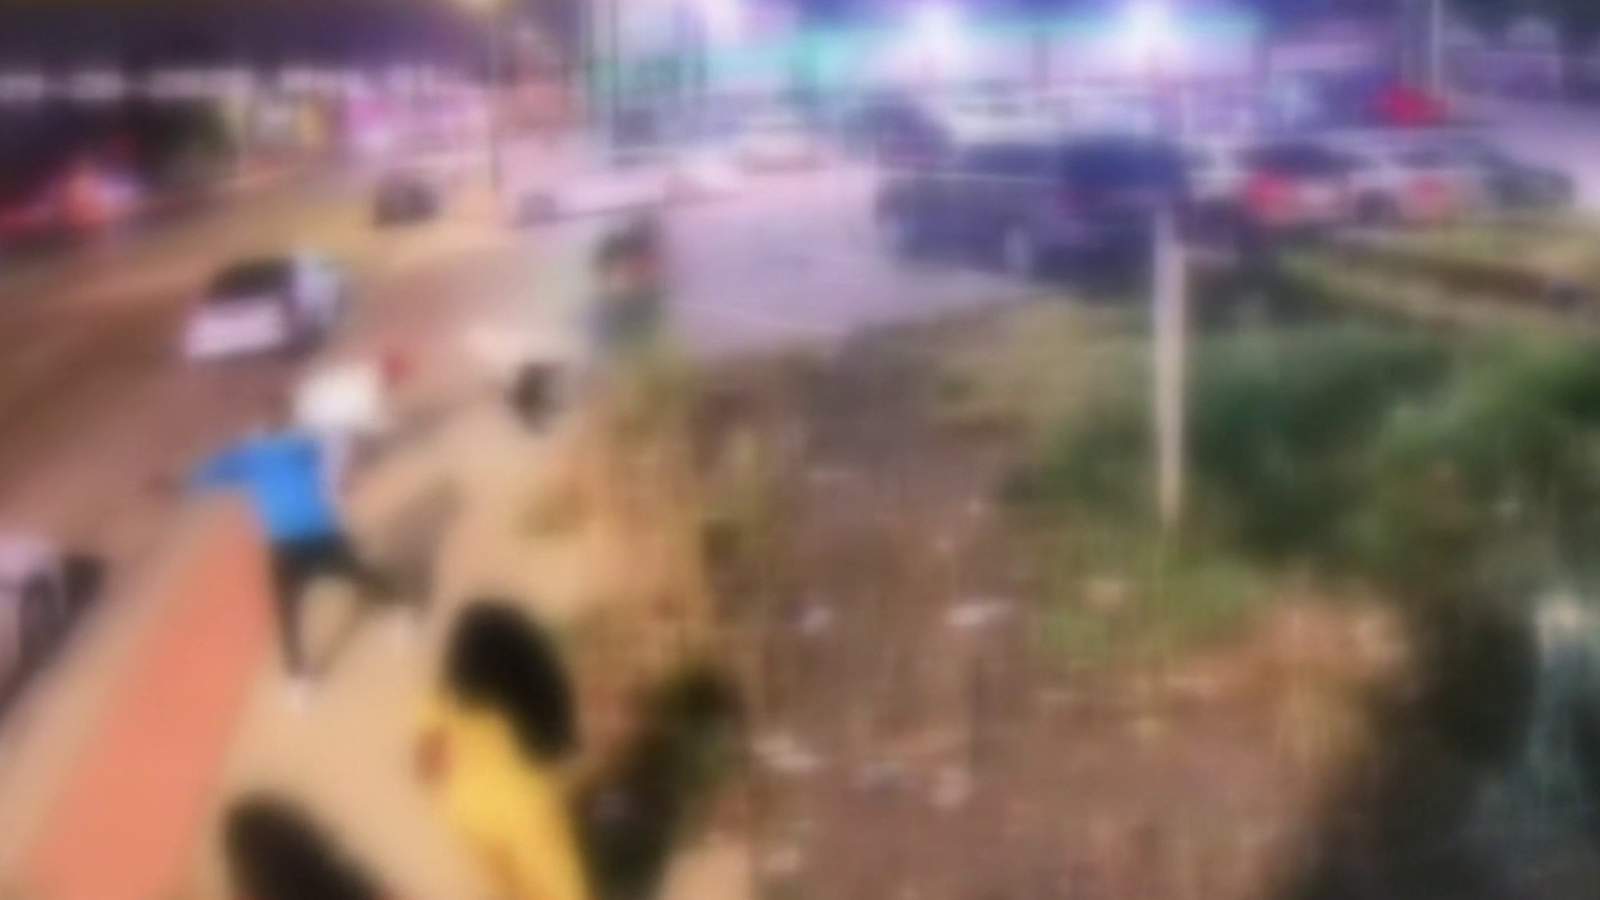 Video shows shooting that injured 6 outside Detroit strip club